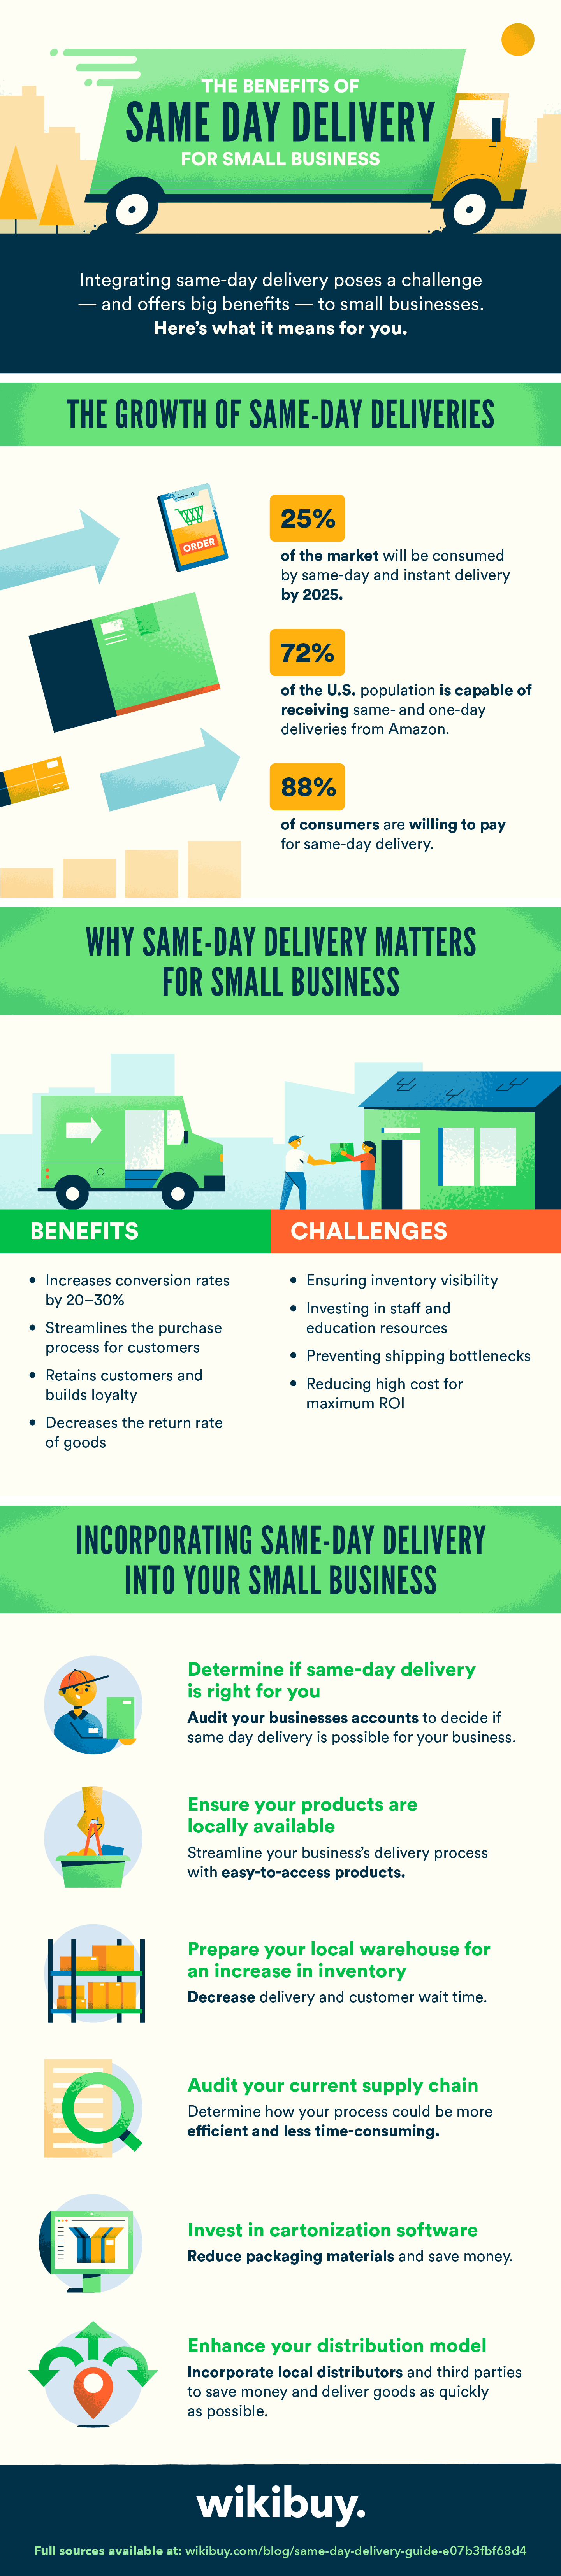 The Benefits of Same Day Delivery For Small Business